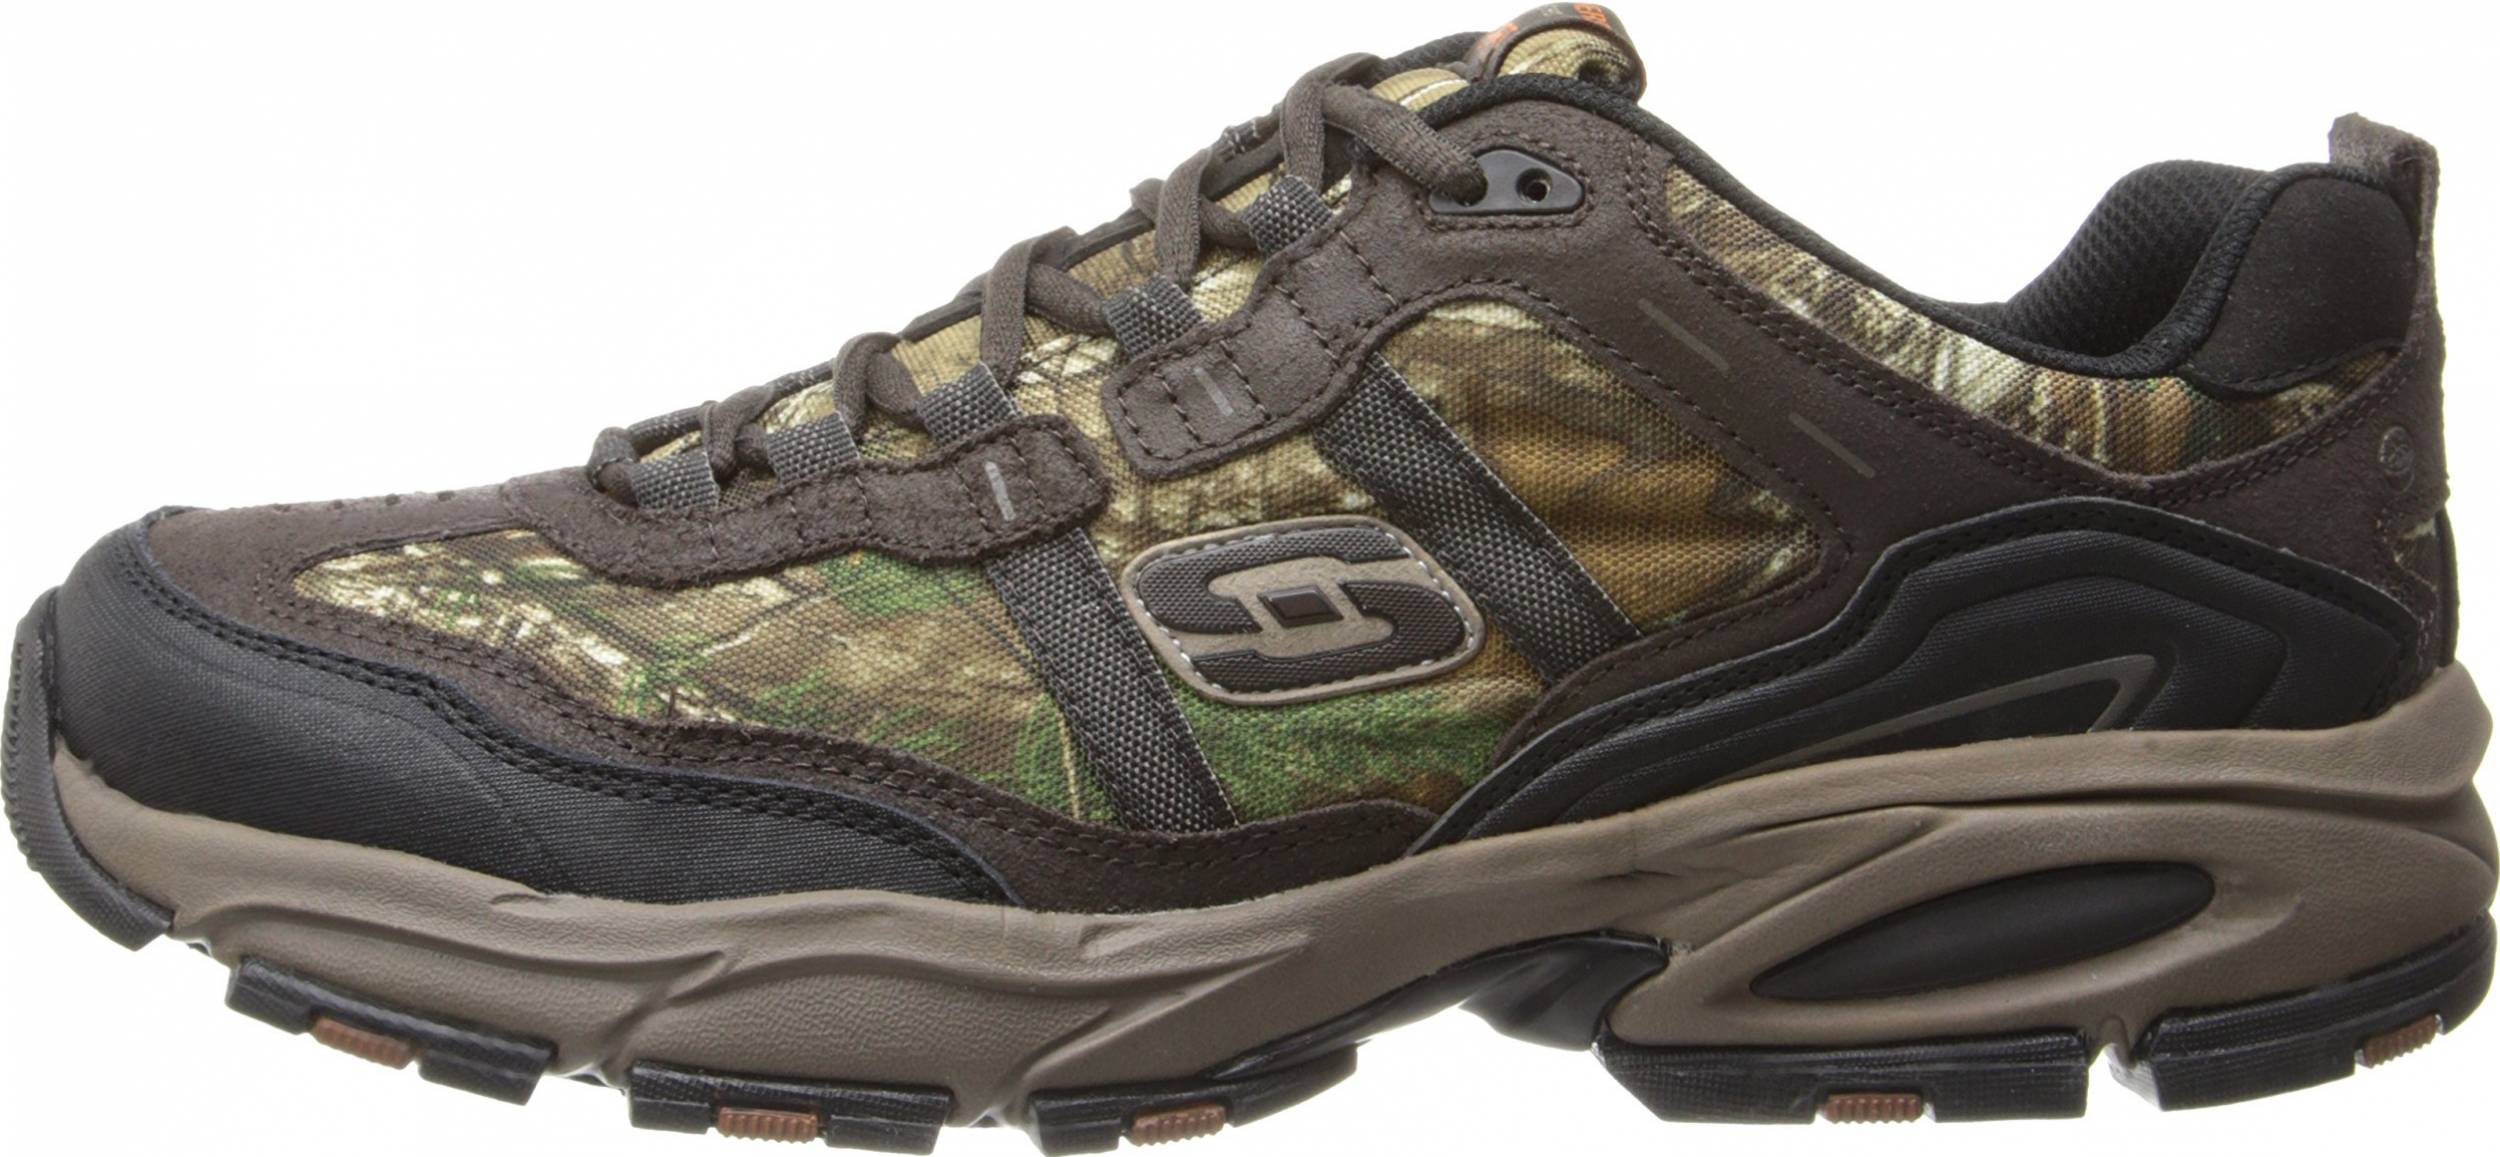 Save 28% on Skechers Training Shoes (27 